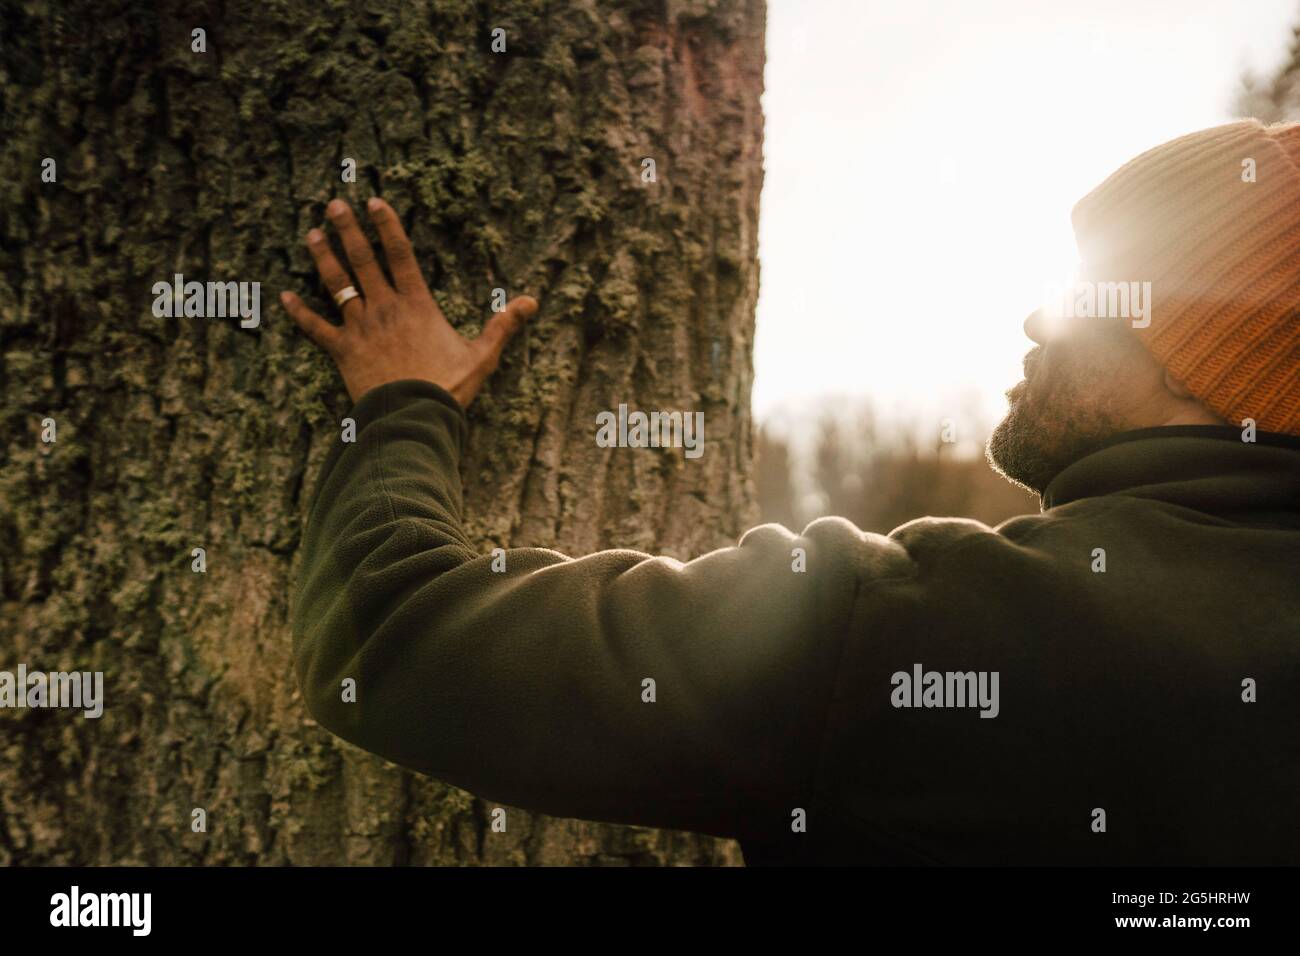 Mature male hiker touching tree trunk in forest on sunny day Stock Photo